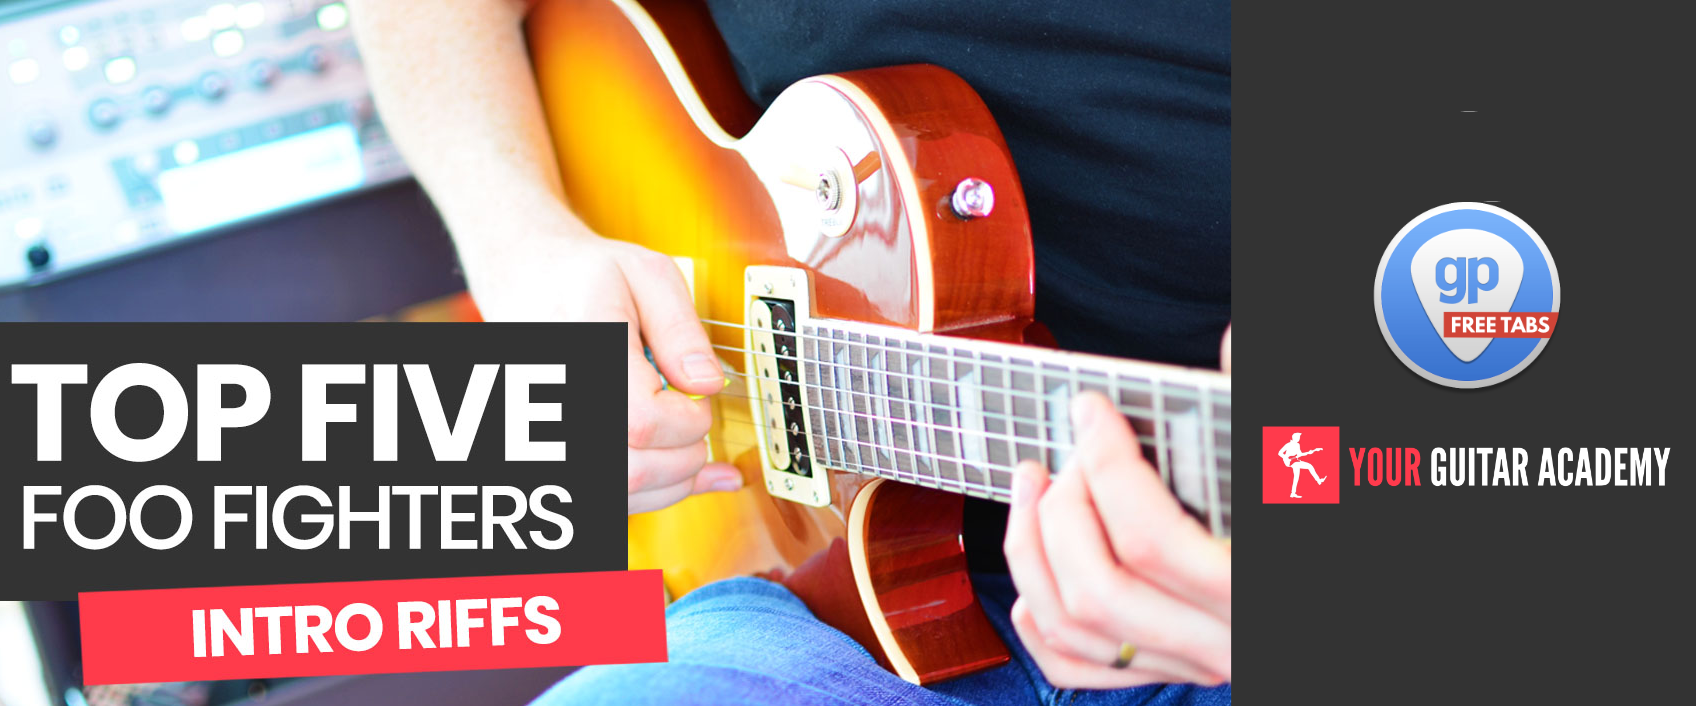 20 amazing acoustic intros with tabs - Guitar Pro Blog - Arobas Music